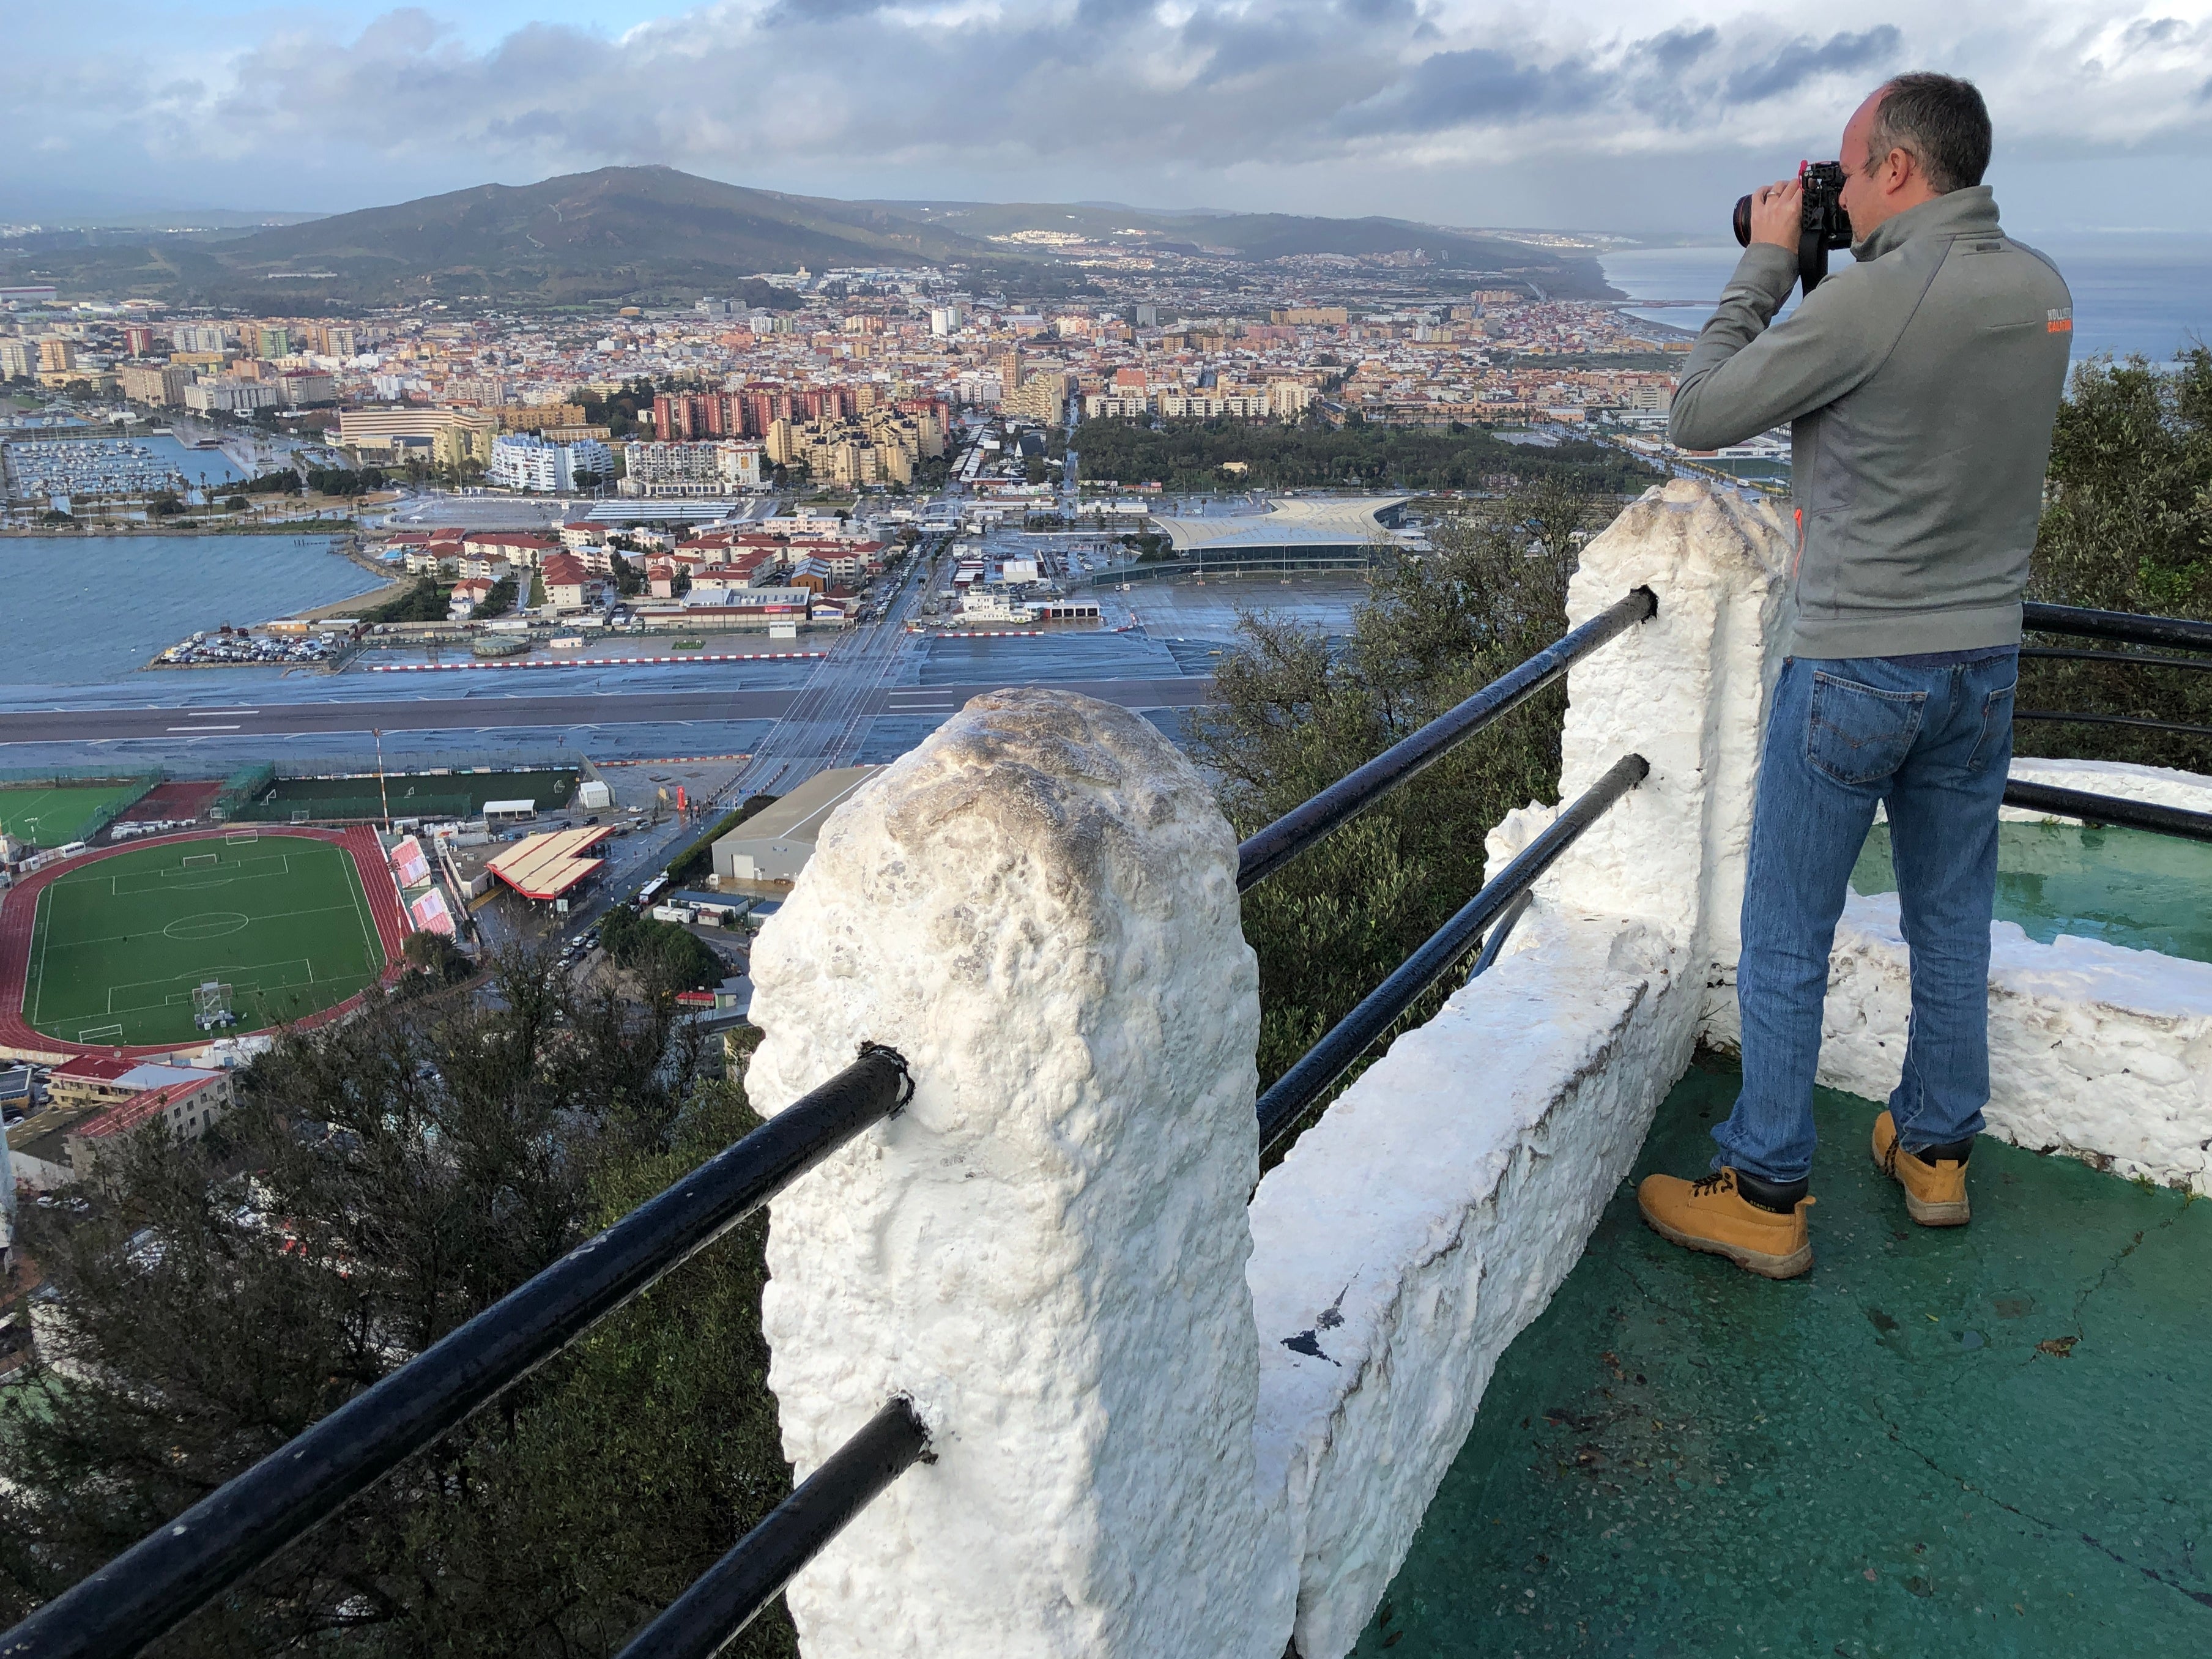 Multinational view: photographer on an outcrop of the Rock of Gibraltar, overlooking the airport runway and southern Spain